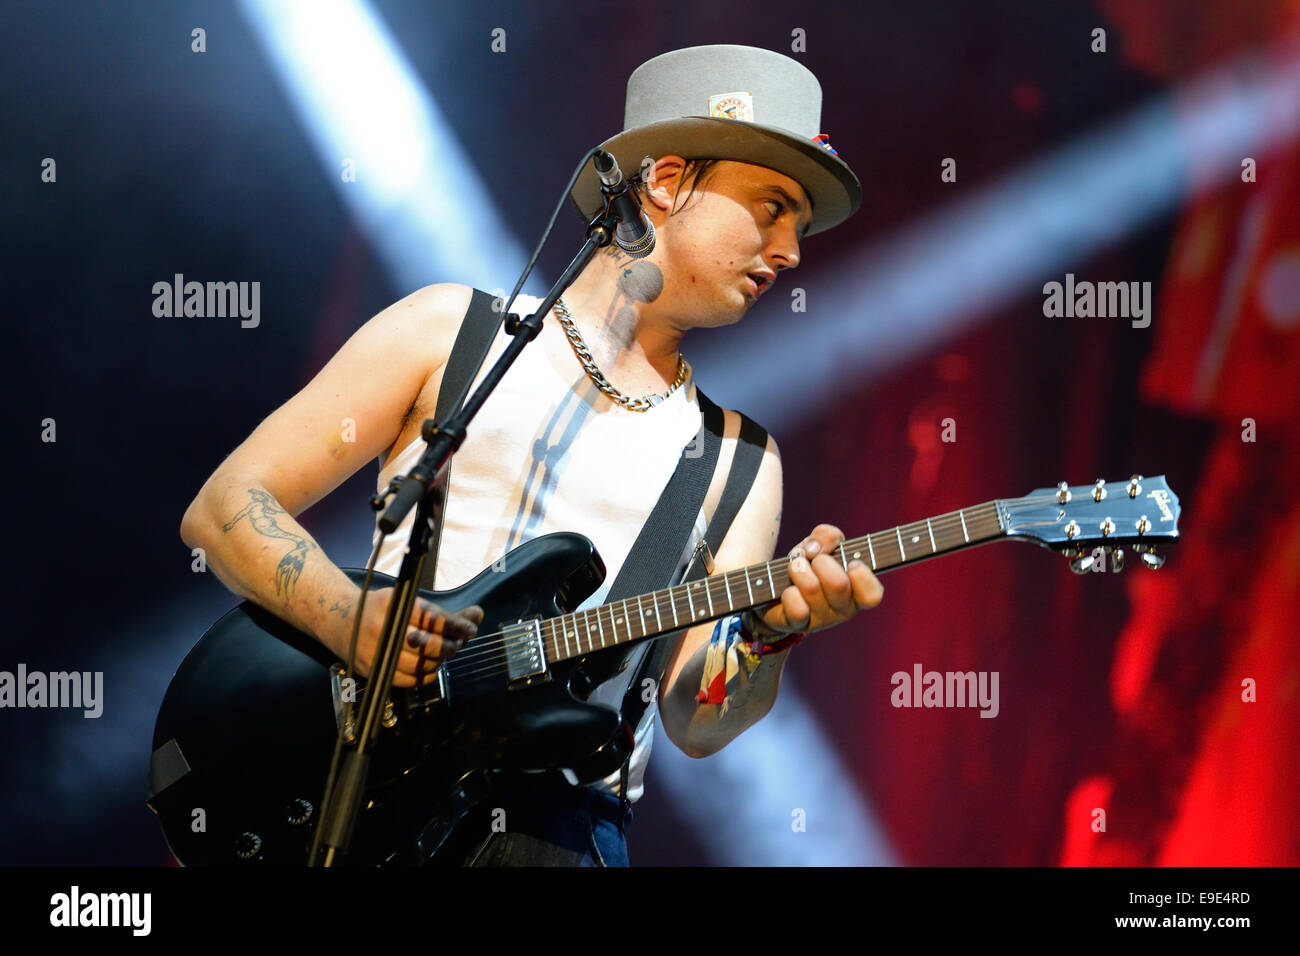 BENICASSIM, SPAIN - JULY 19 The Libertines (English rock band) performs at FIB Festival on July 19, 2014 in Benicassim, Spain. Stock Photo